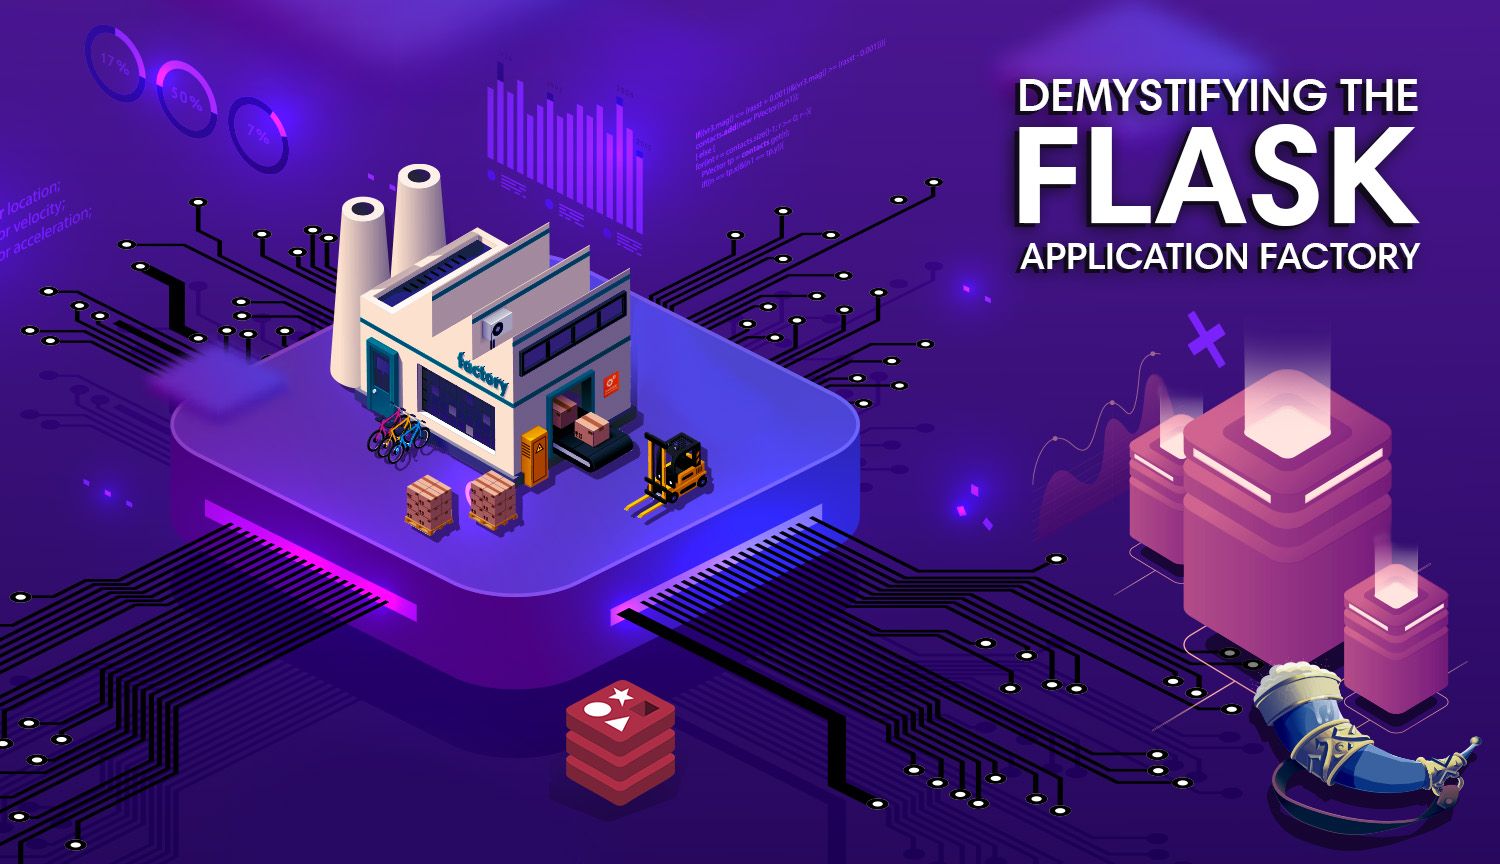 Demystifying Flask’s “Application Factory”